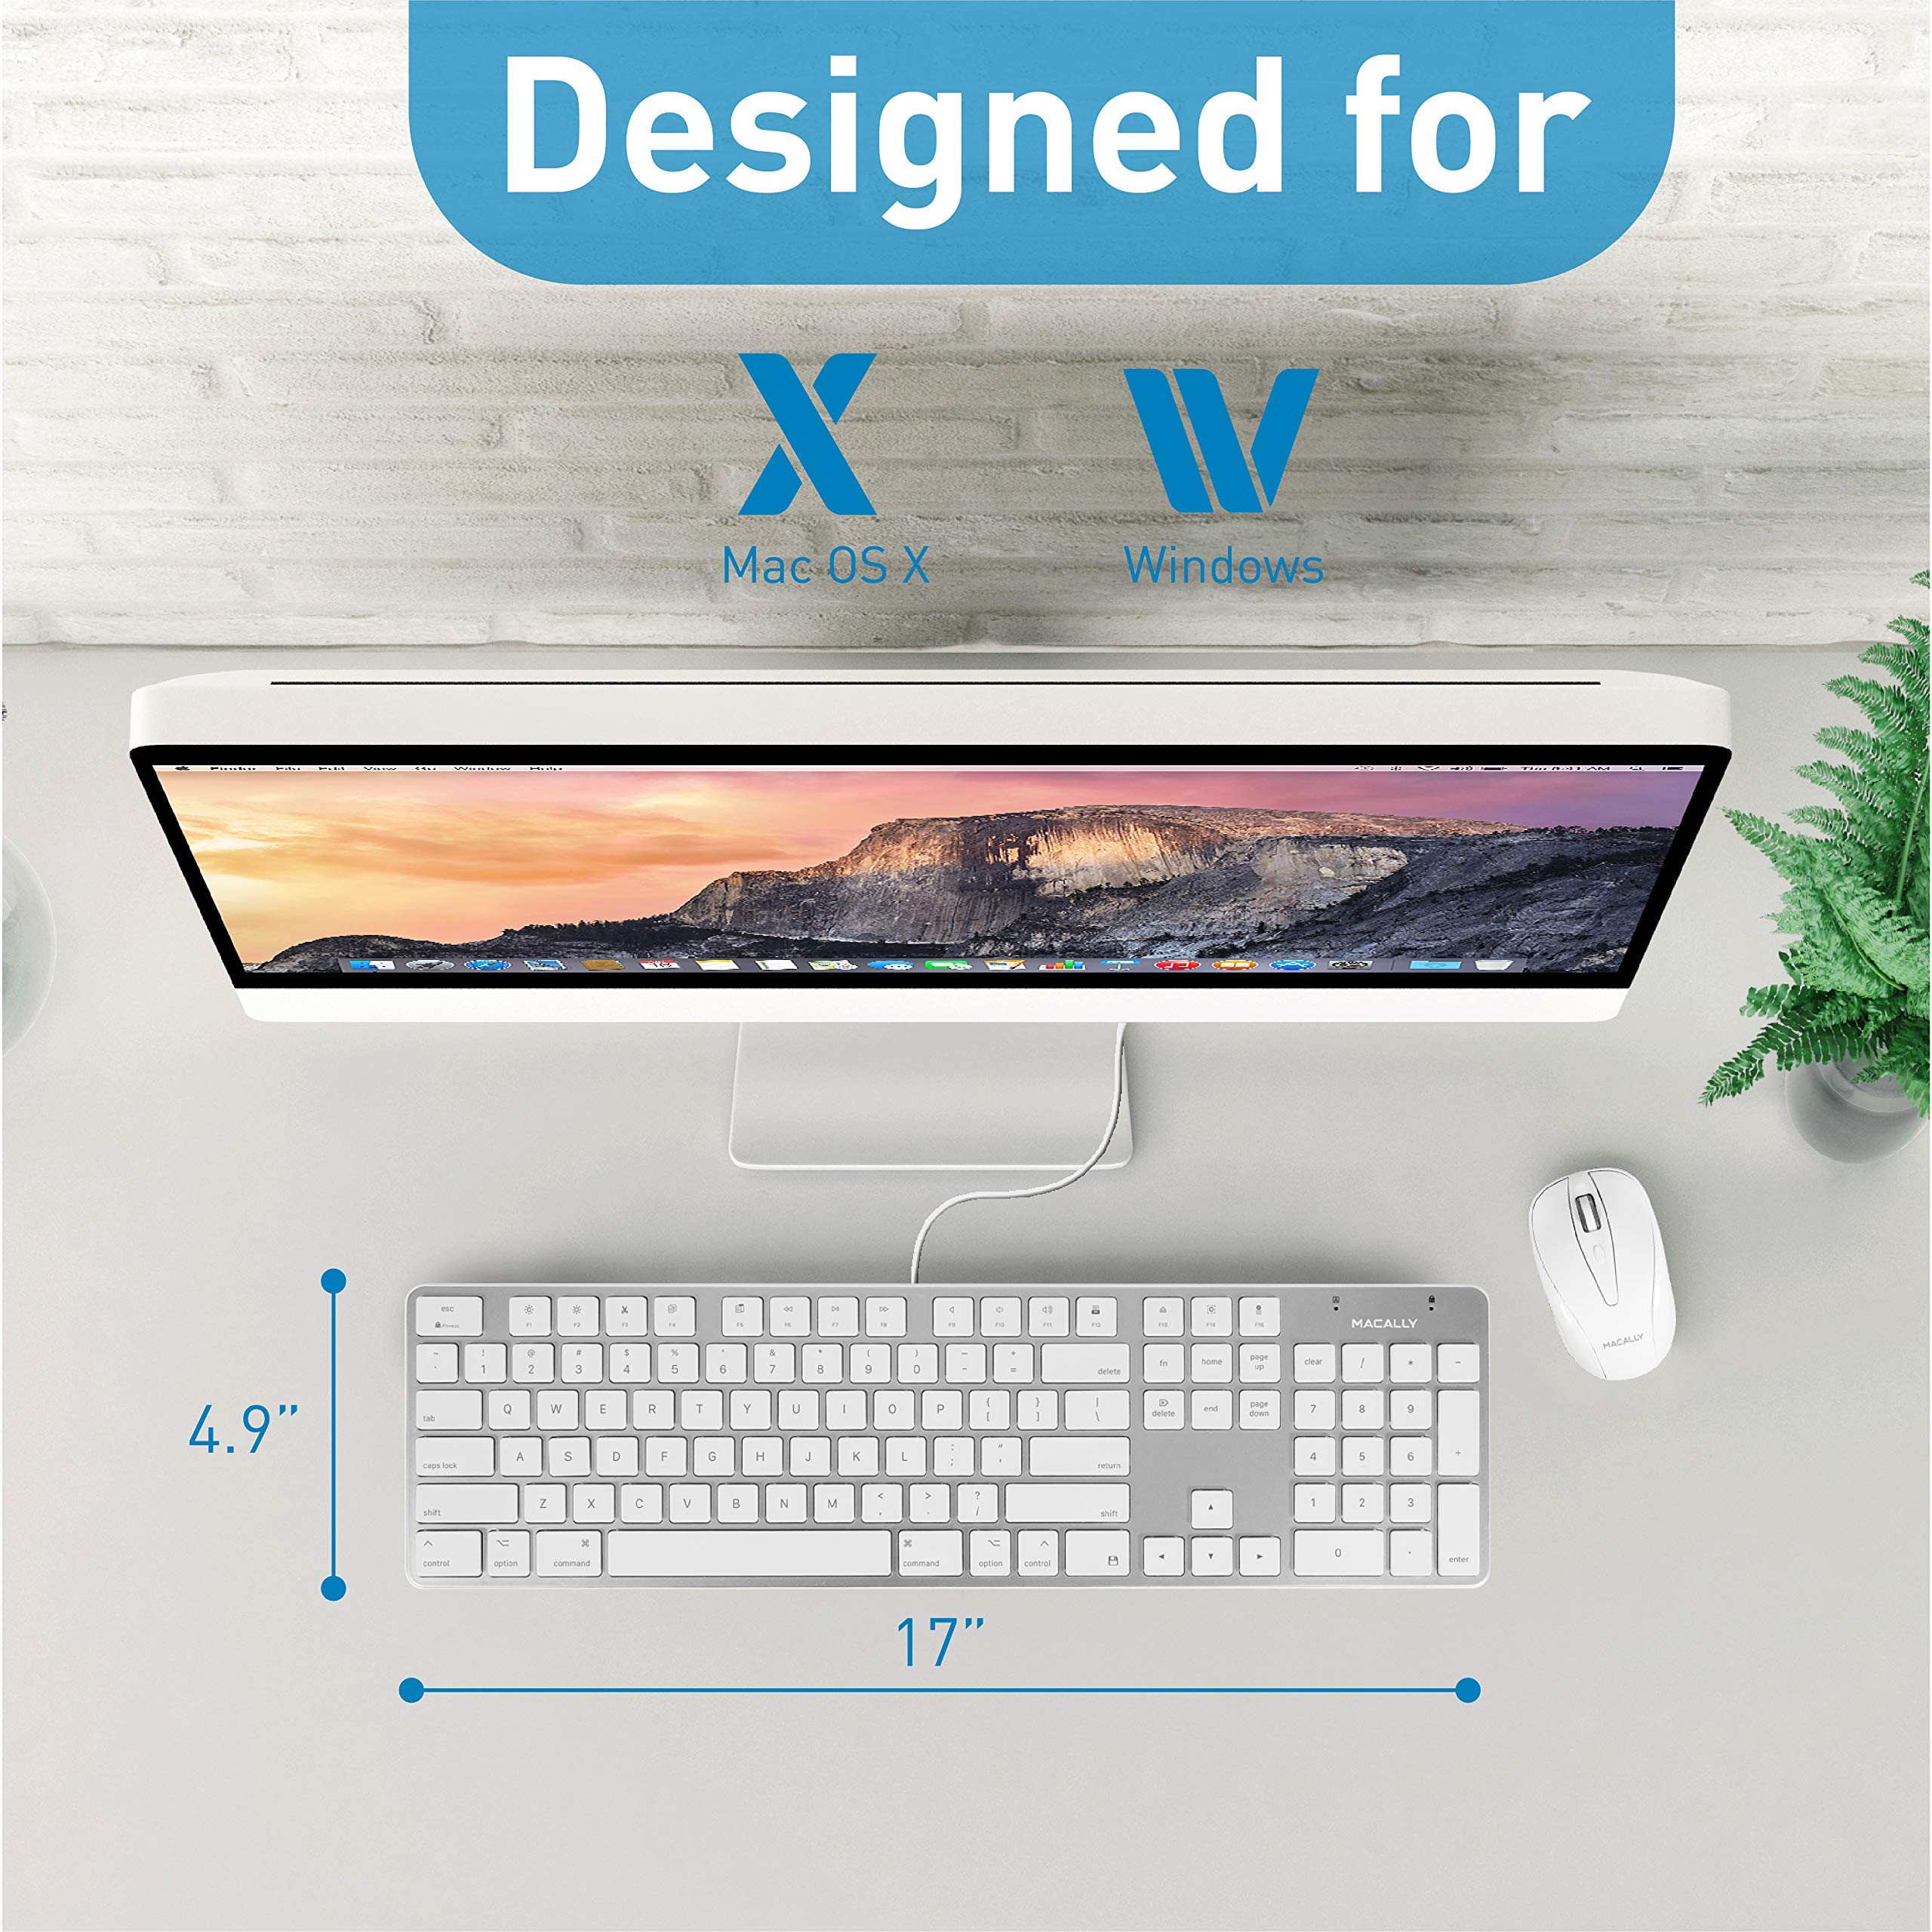 Macally Ultra Slim Wired Keyboard and a Silent Wired Mouse, Simplistic Apple Accessories